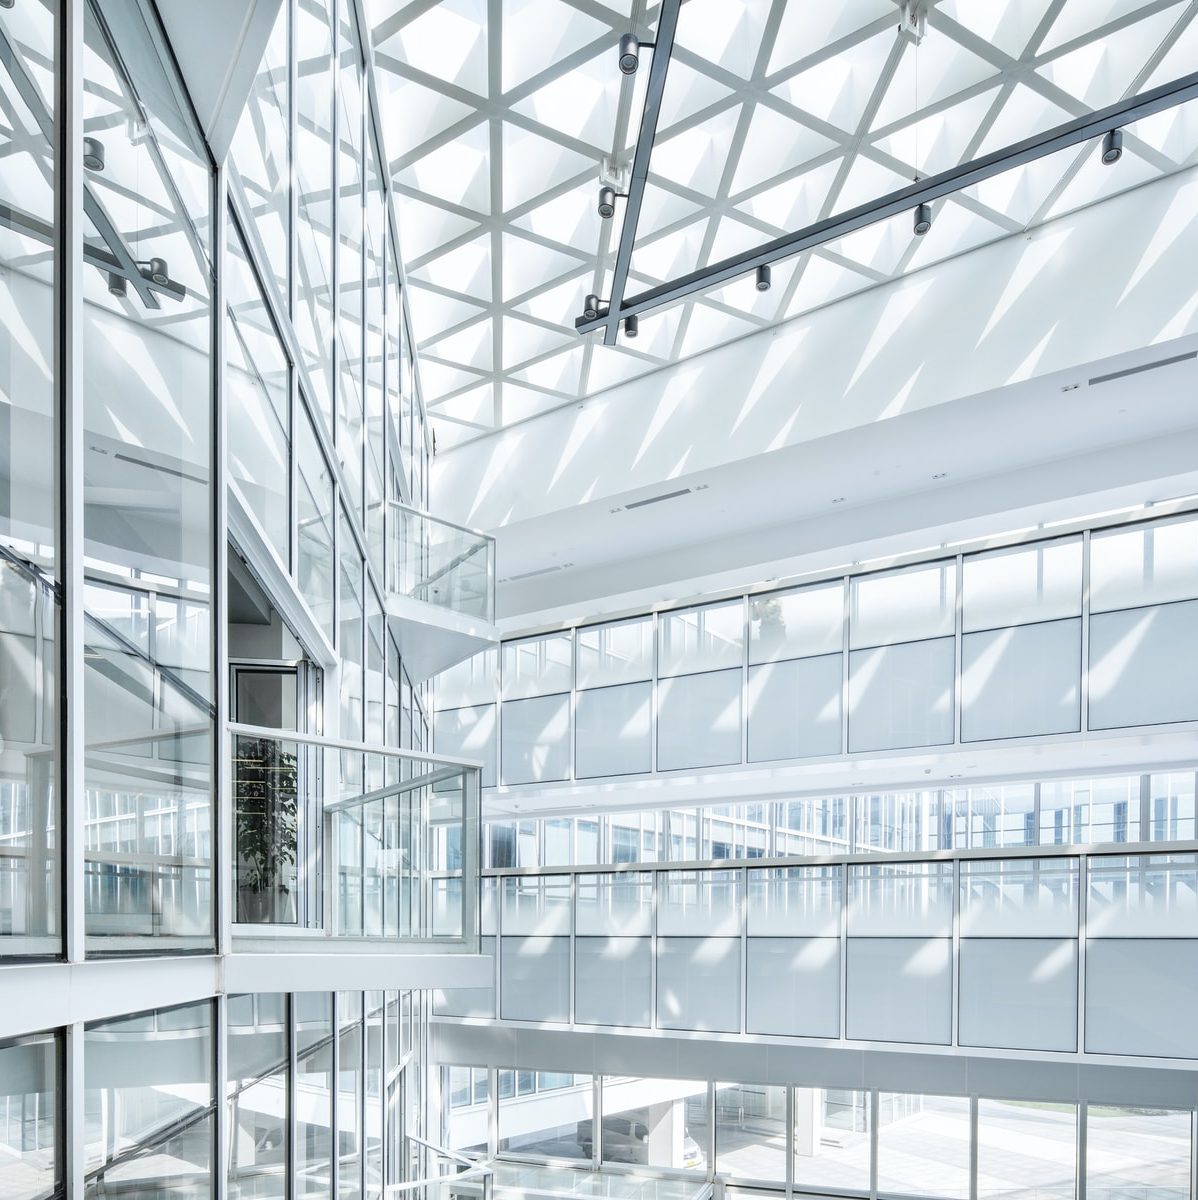 clear glass building interior during daytime